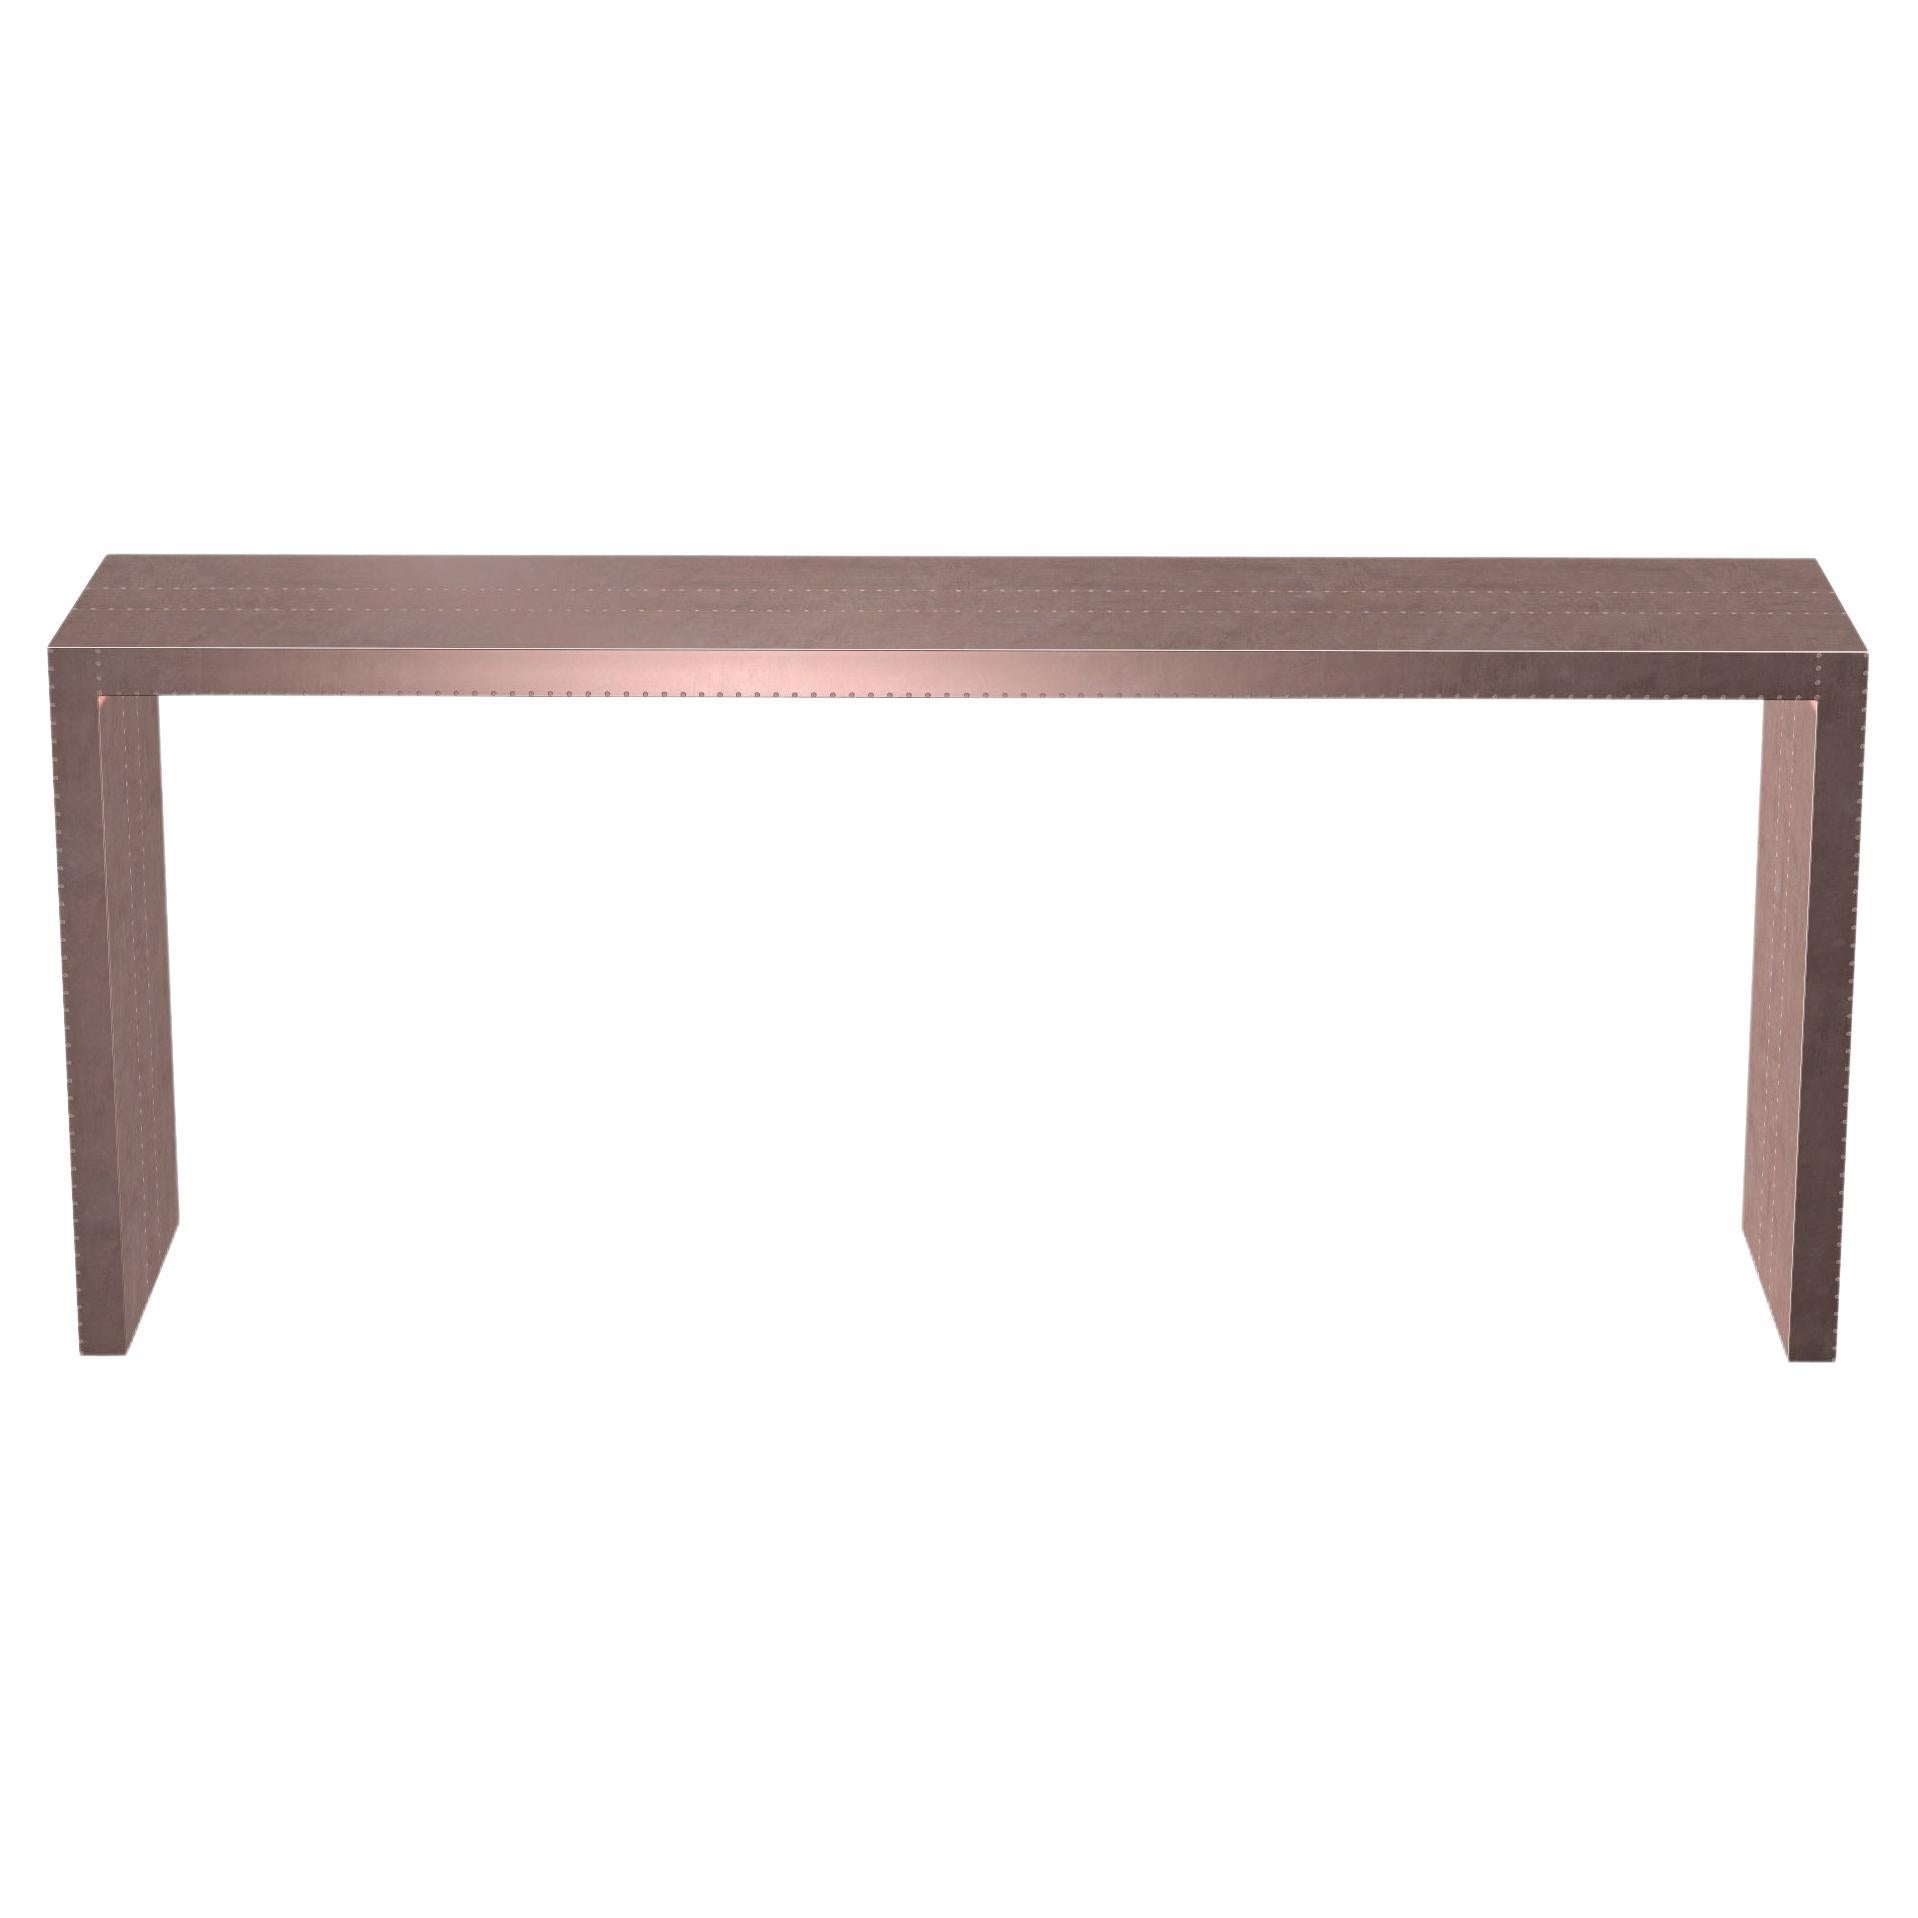 Art Deco Rectangular Console Tables Fine Hammered Copper by Alison Spear